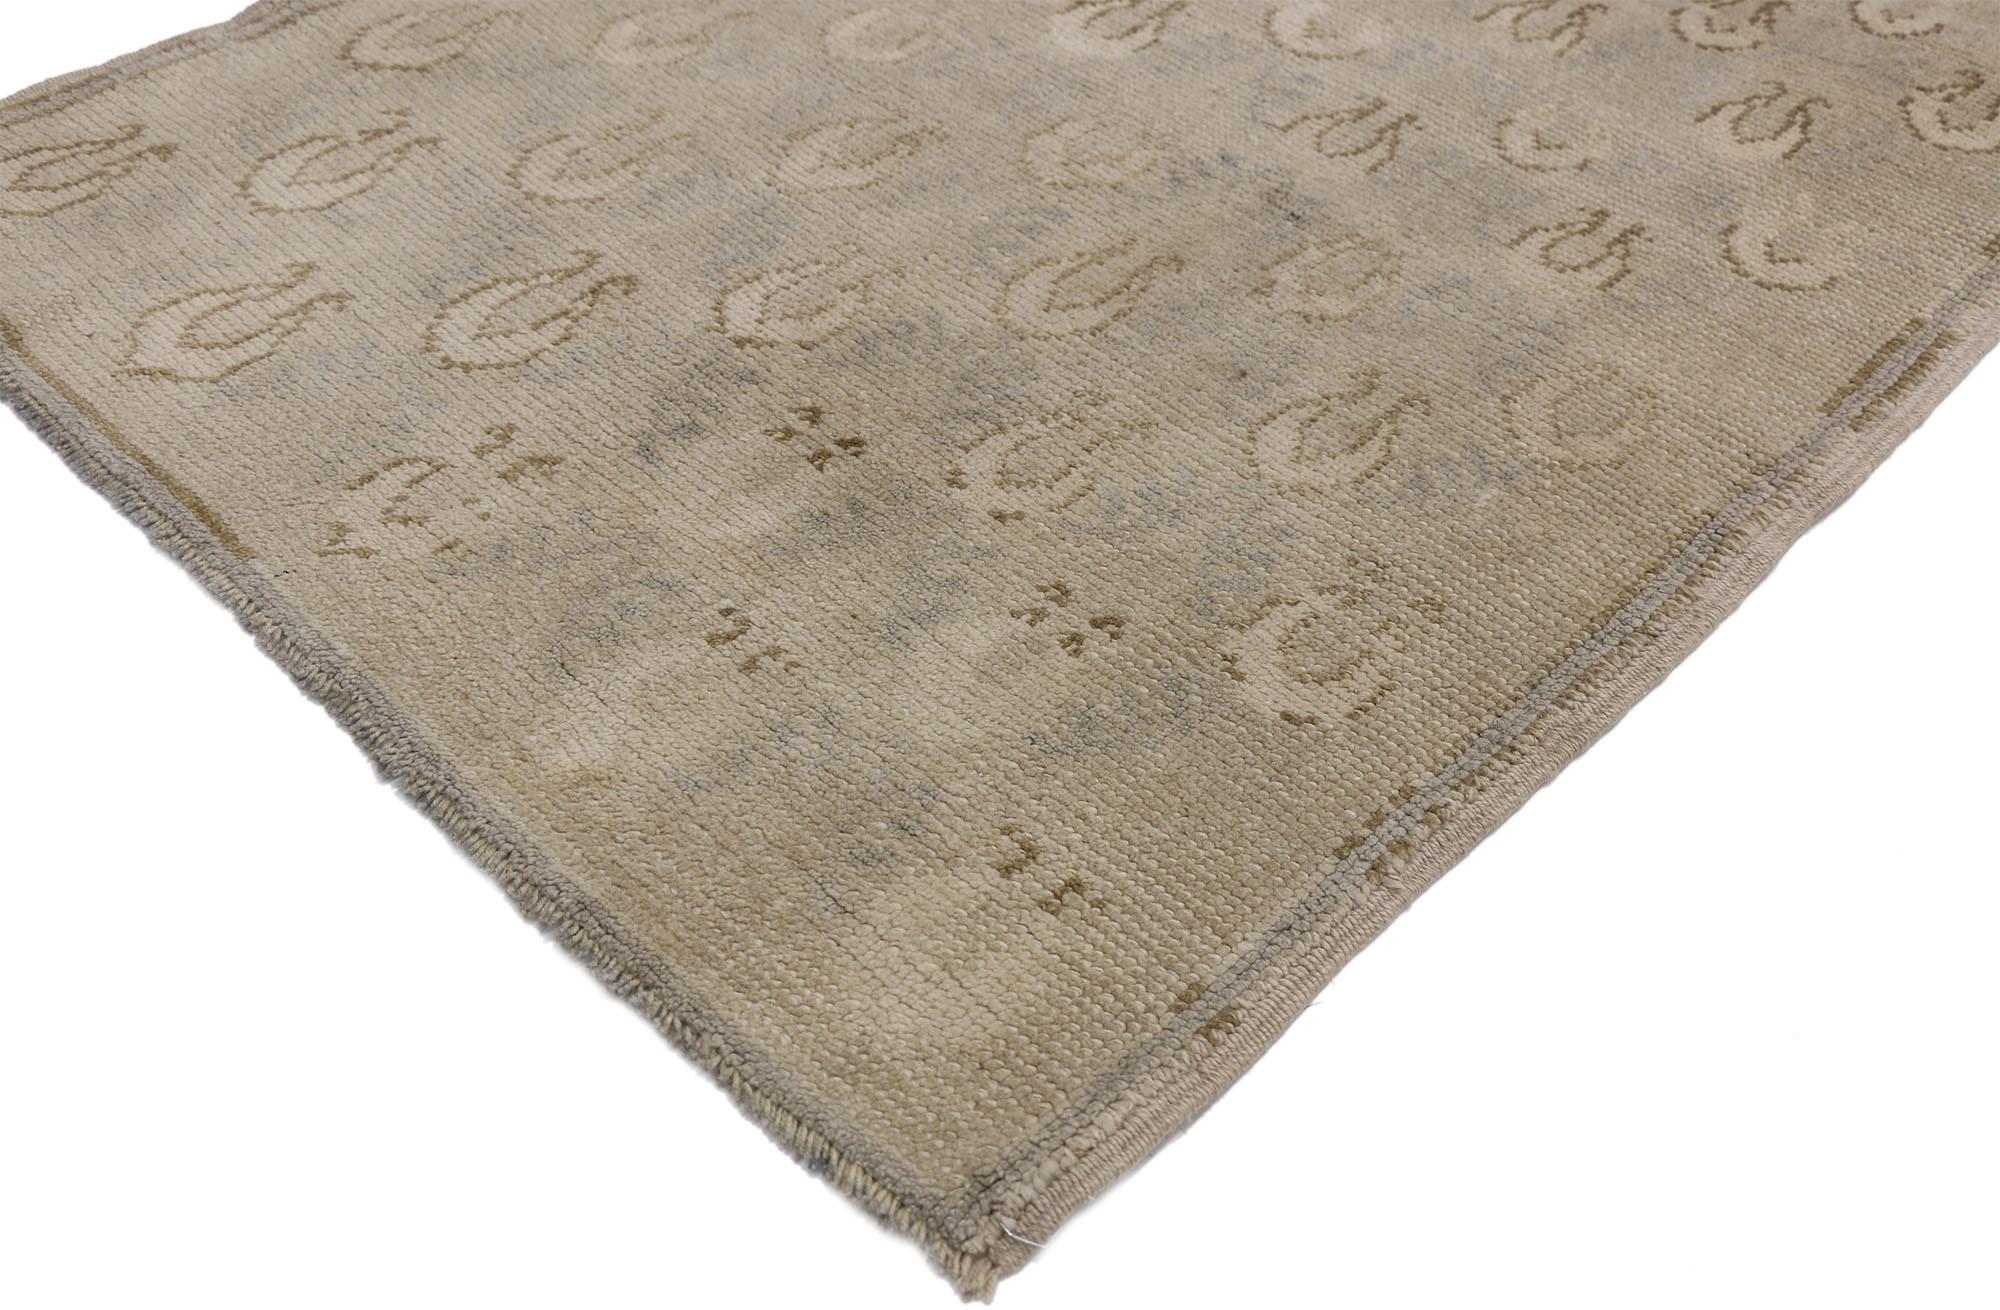 52468 Vintage Turkish Oushak Runner with American Colonial Style, muted Hallway runner. Showcasing timeless elegance in a demure color palette this hand knotted wool Vintage Turkish Oushak runner with American Colonial style features an all-over